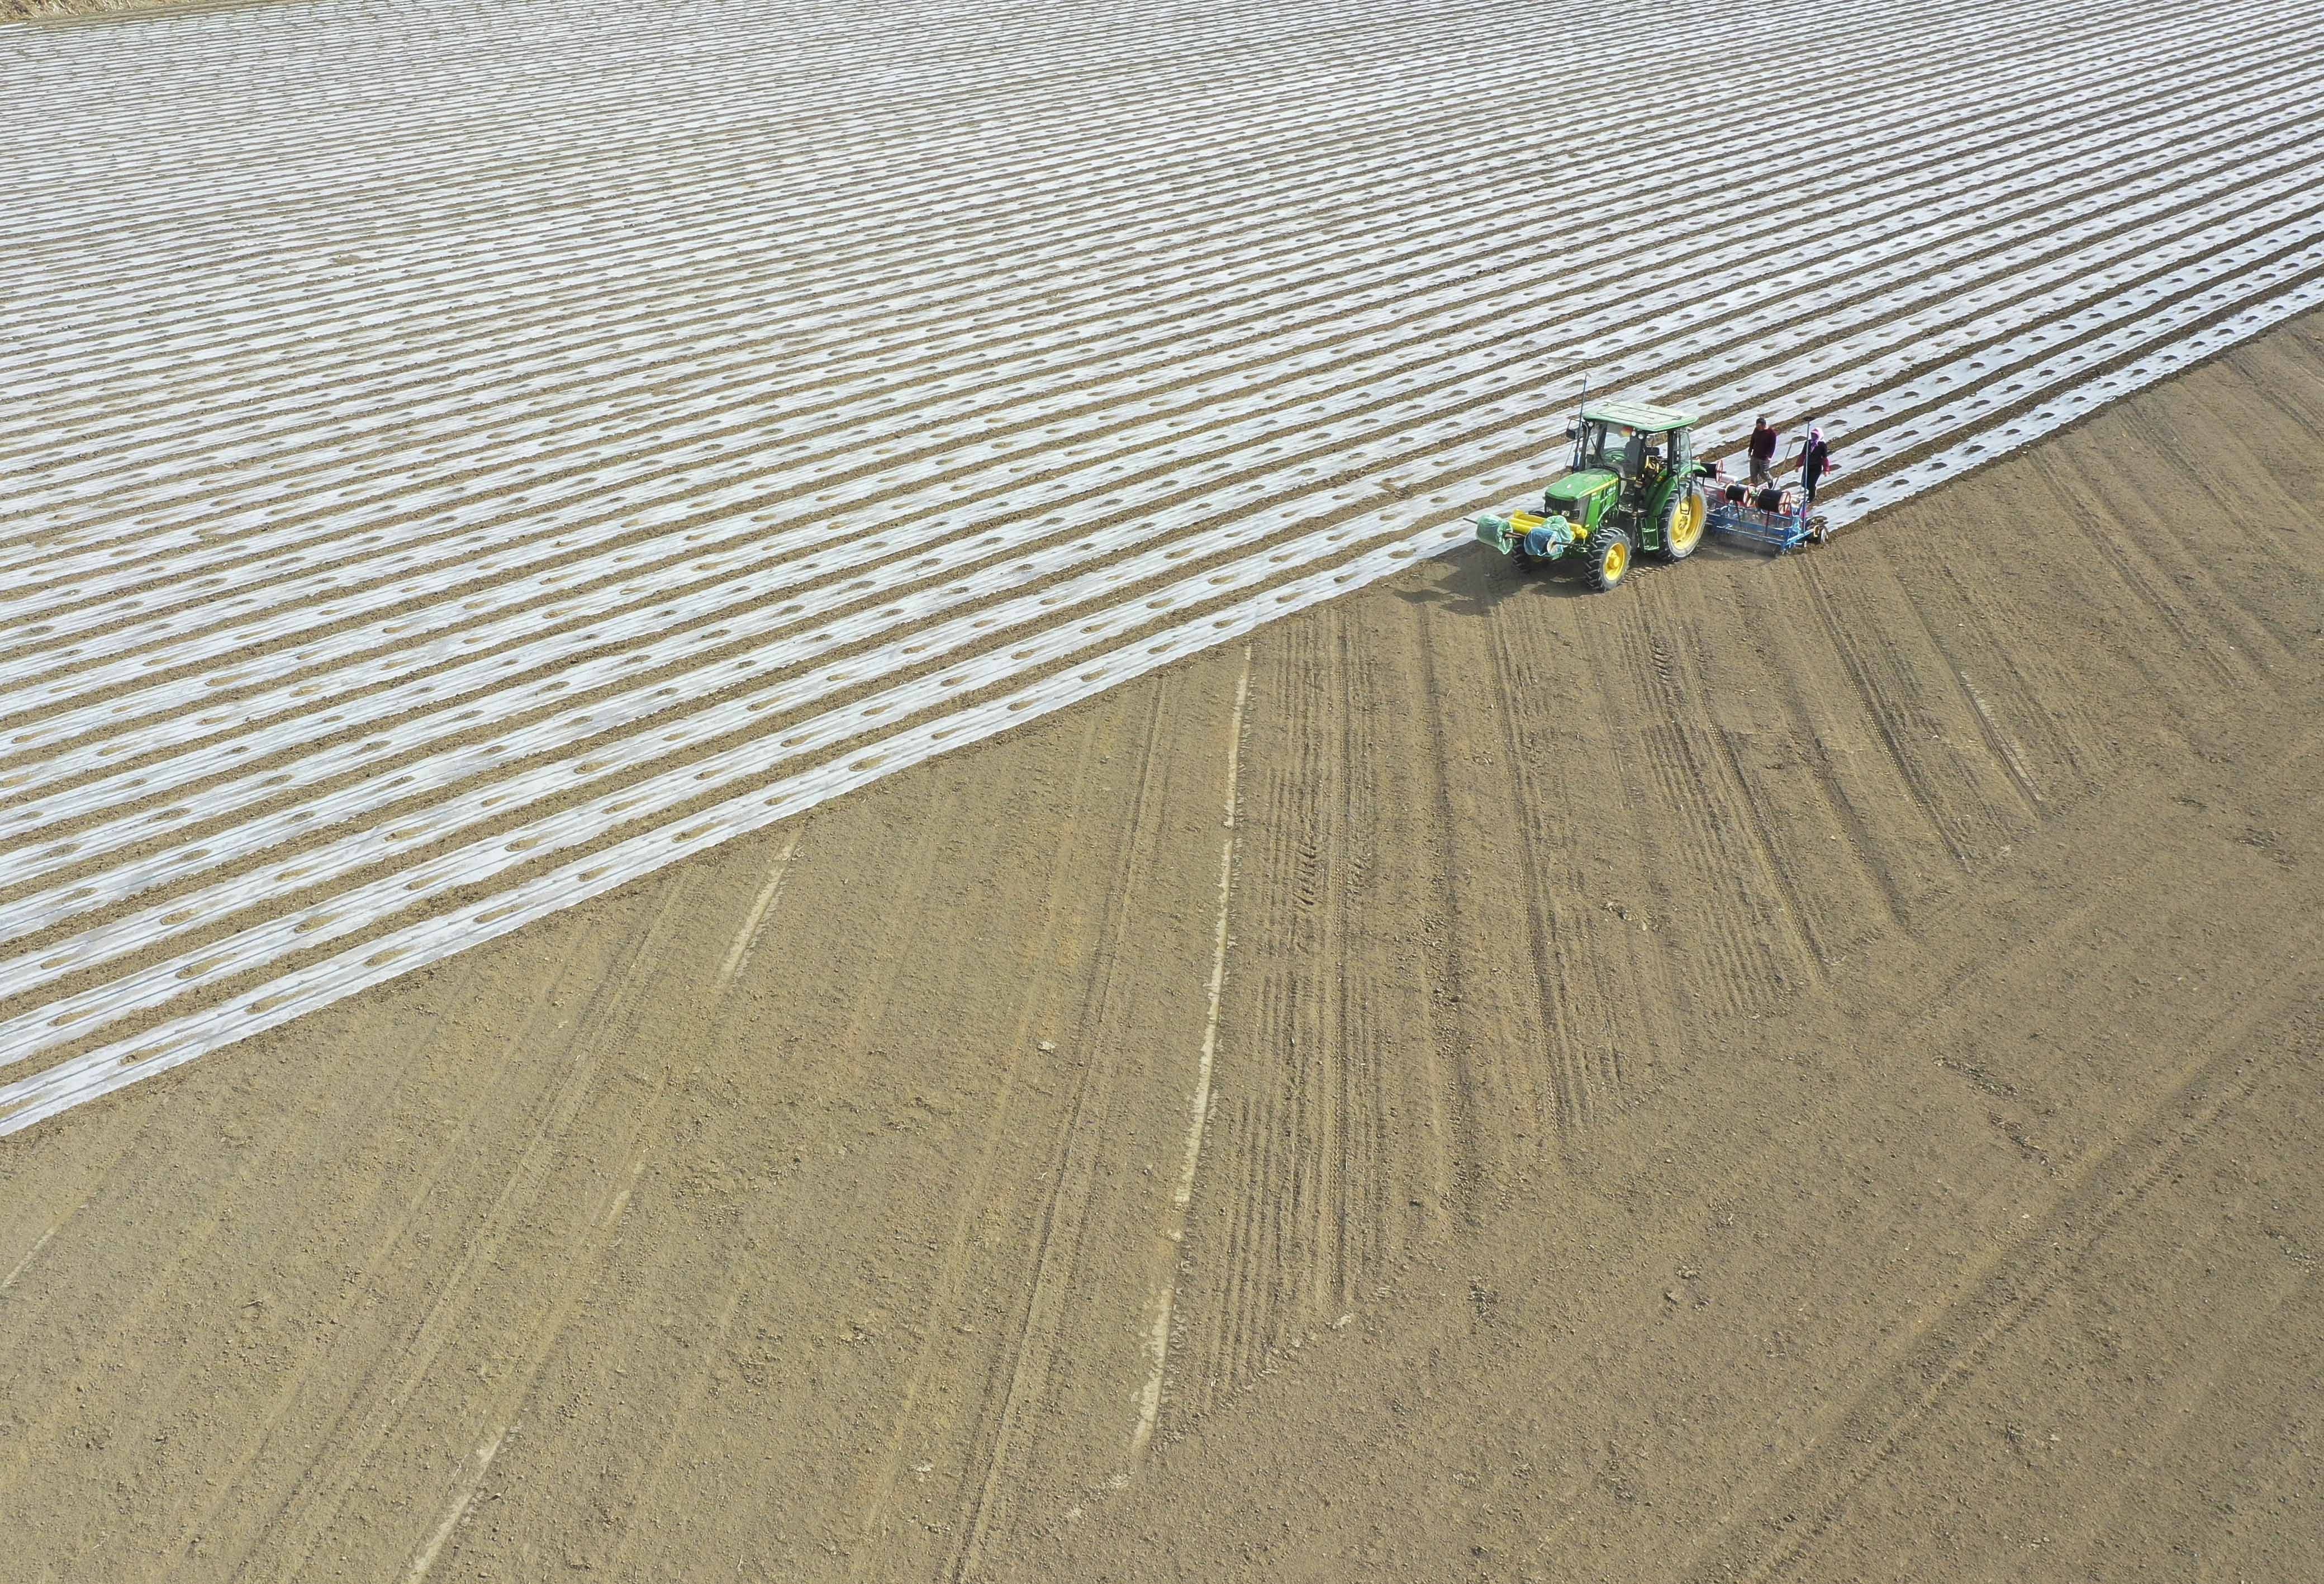 Farmers cover field with plastic films in Yuli County, Xinjiang, on March 28, 2021. Photo: Xinhua